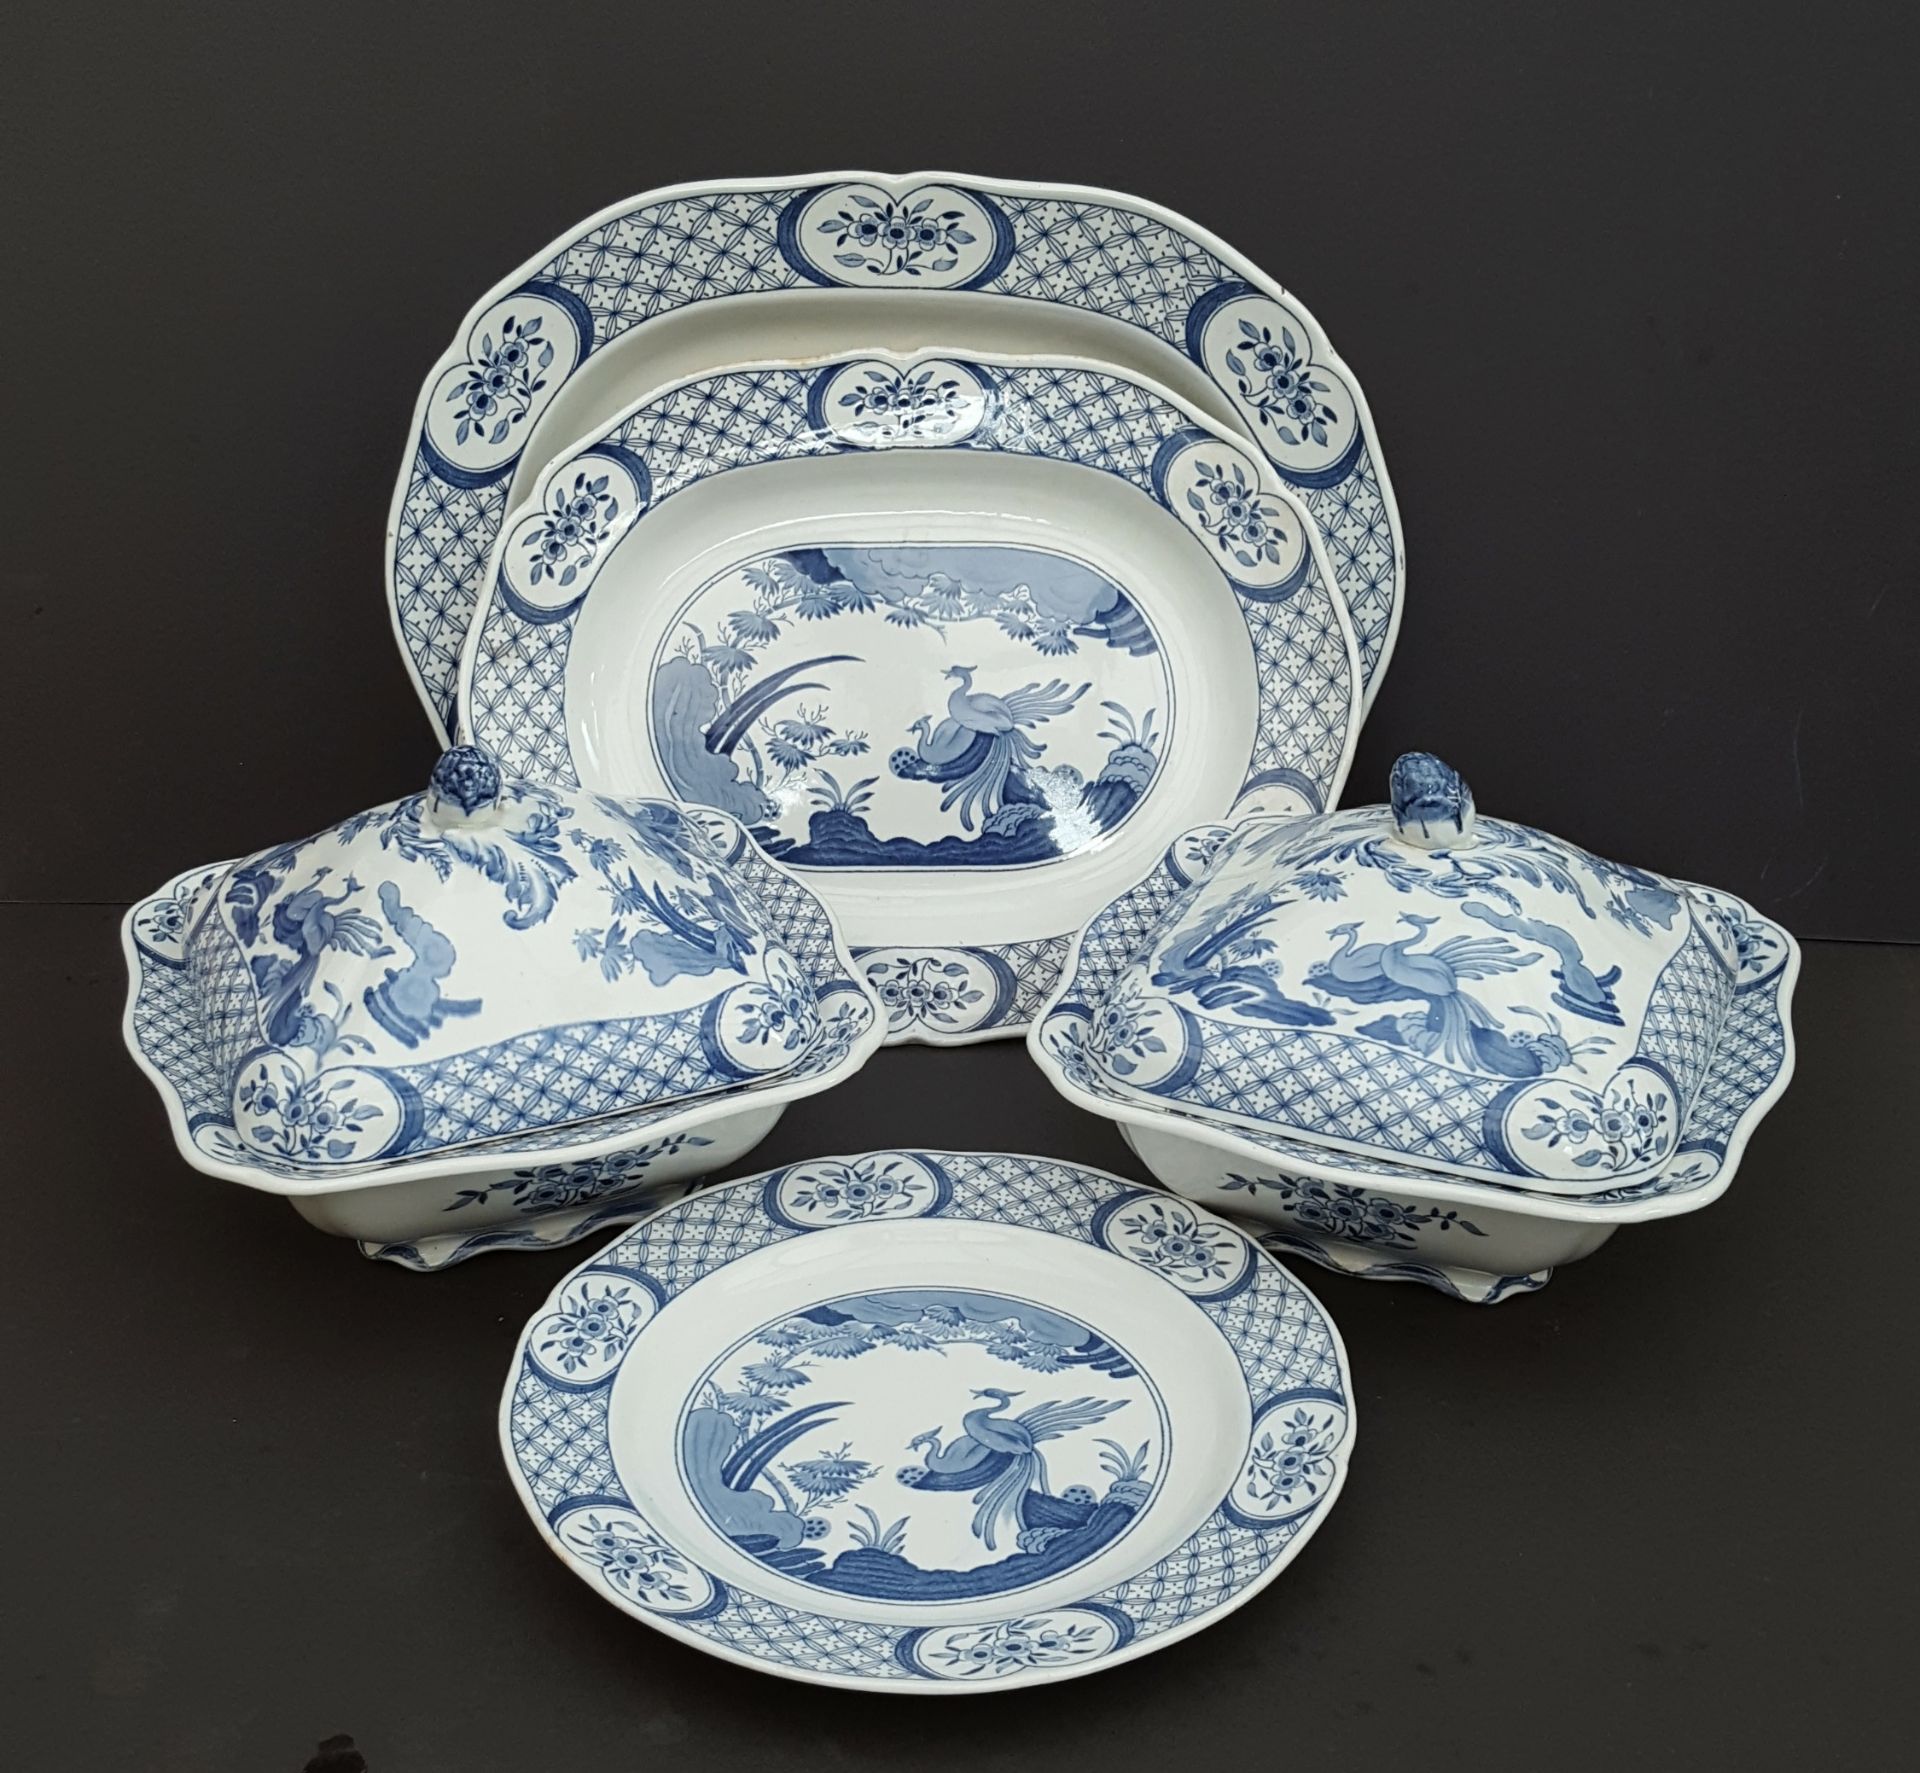 Collection of Blue & White Furnivals Ltd Old Chelsea China Total Of 7 Pieces Reg No c1913